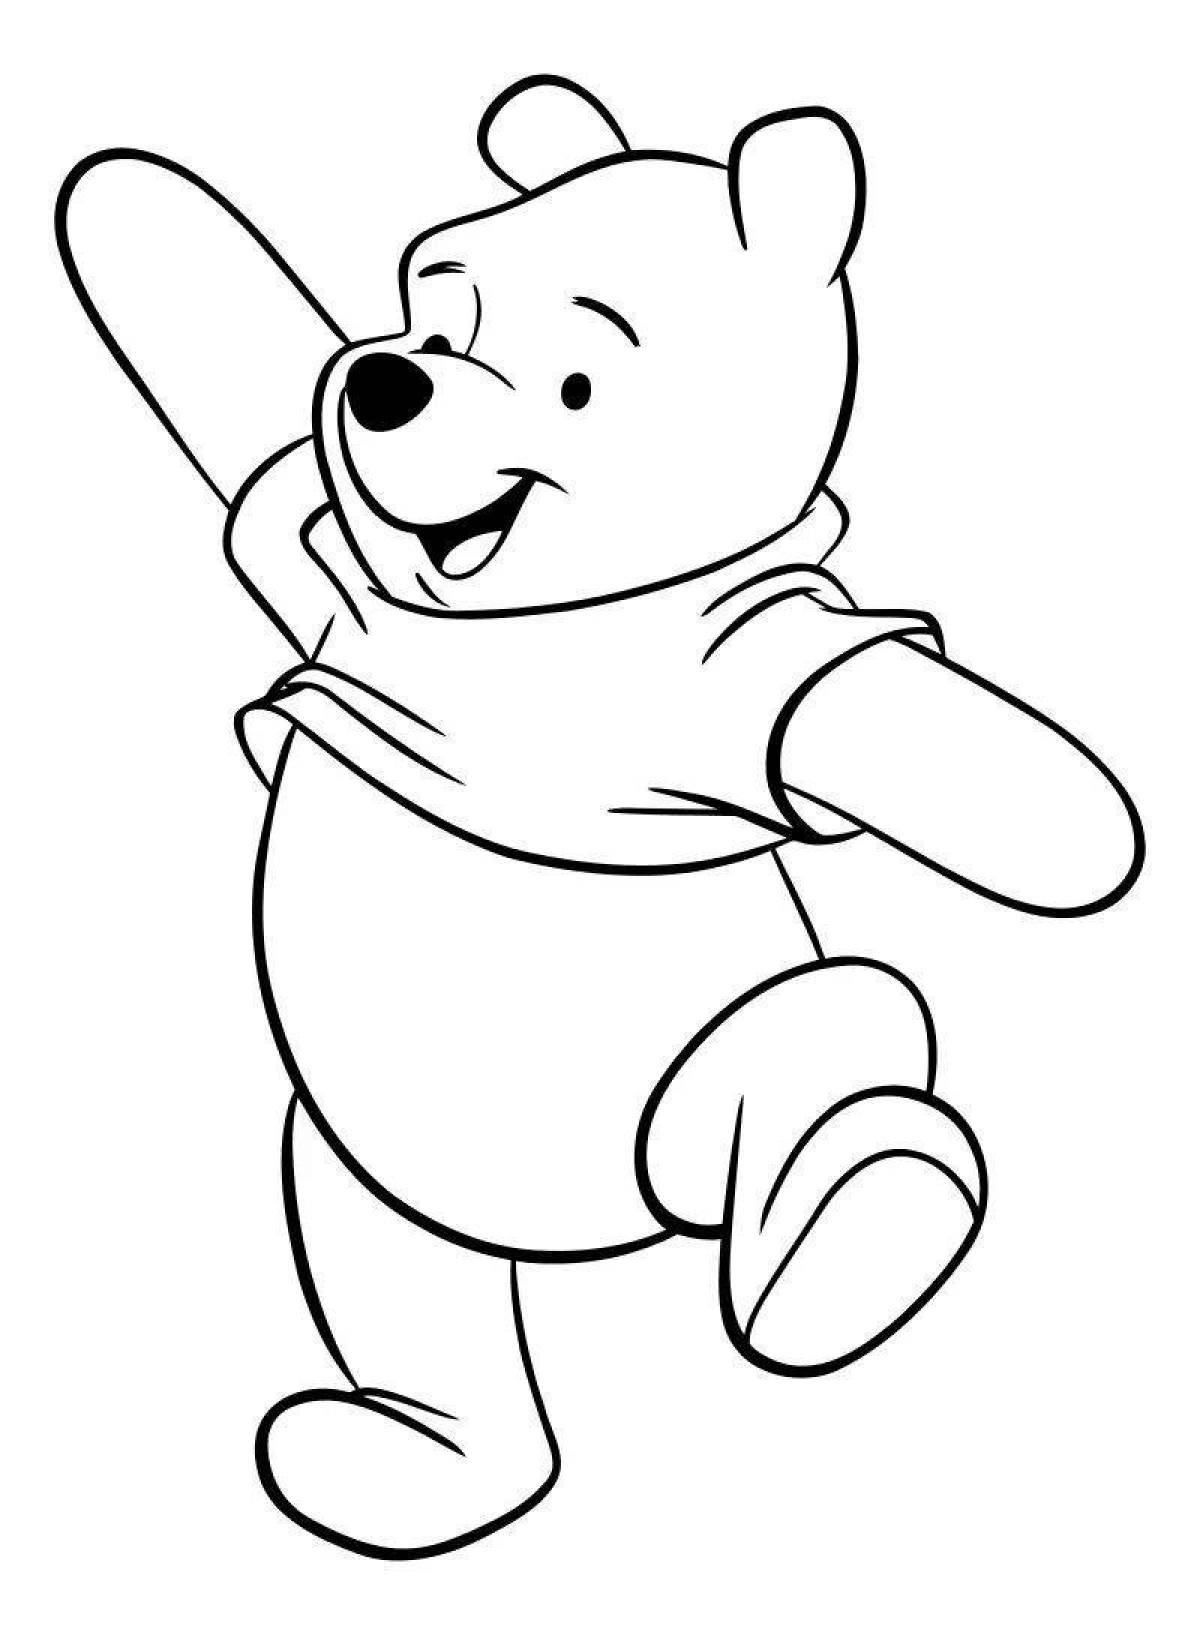 Winnie the pooh holiday coloring book